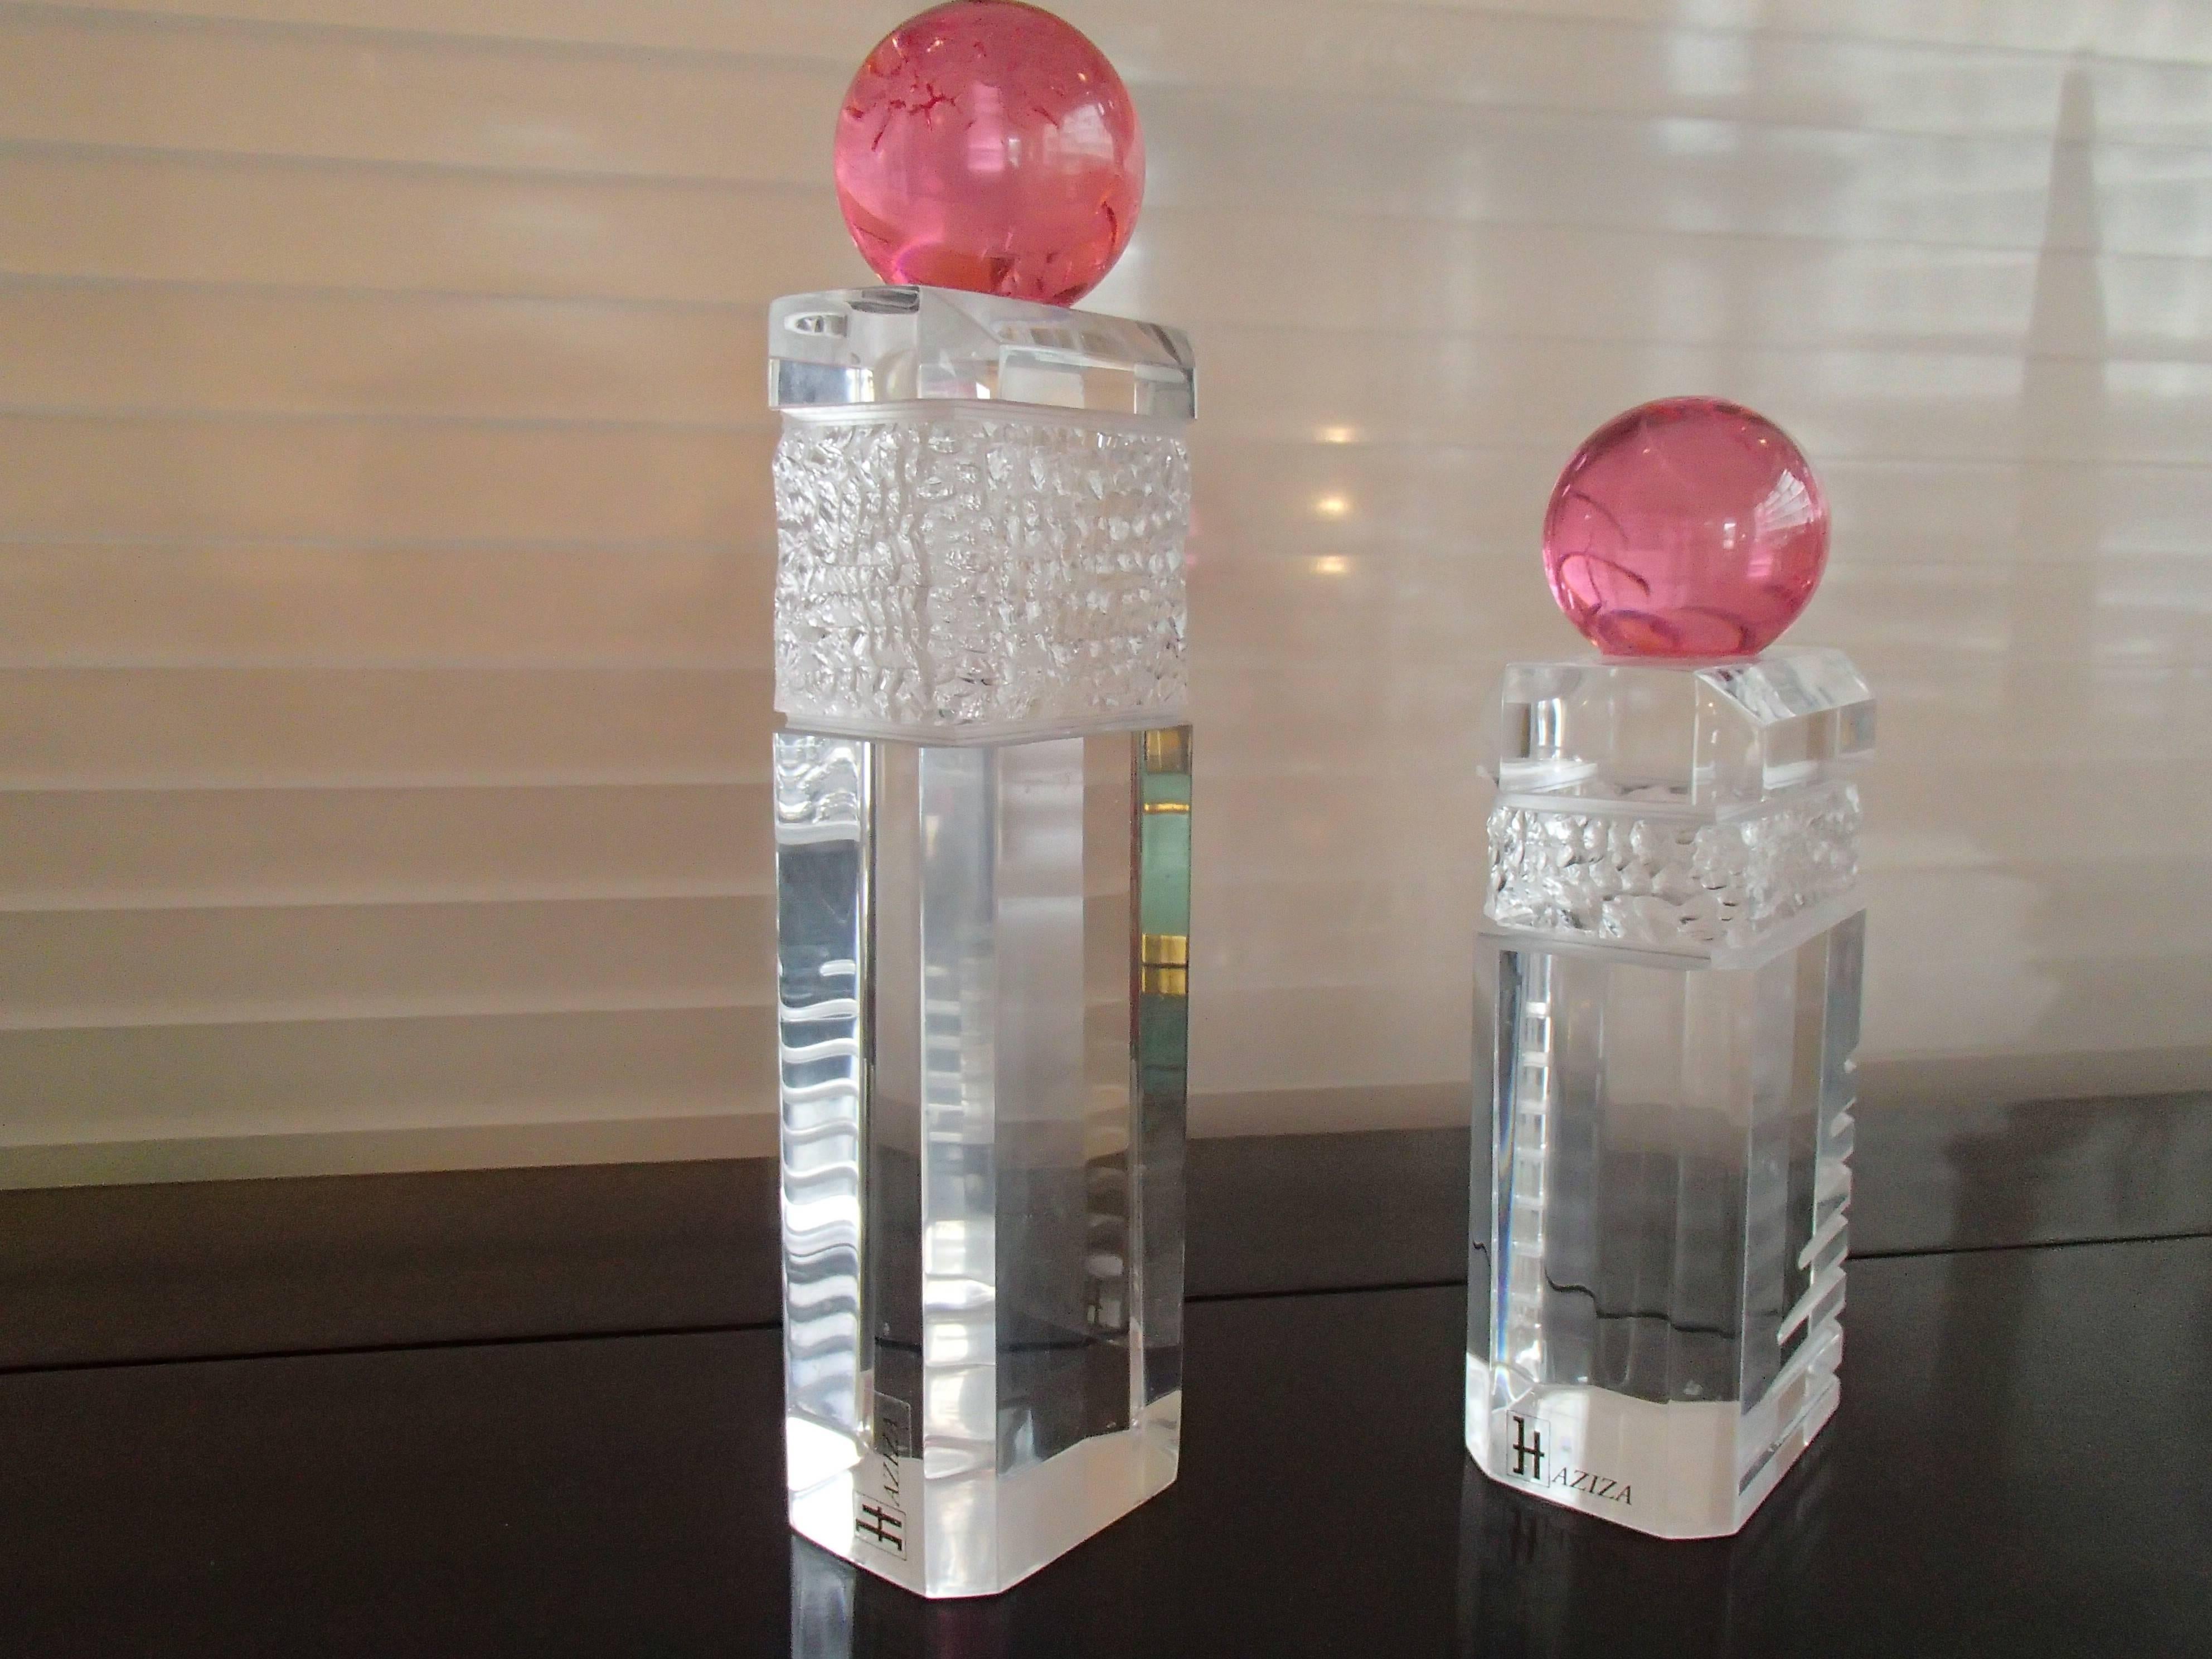 American Pair of Modern Haziza Plexi Glass Sculptures Transparent and Pink Ball For Sale